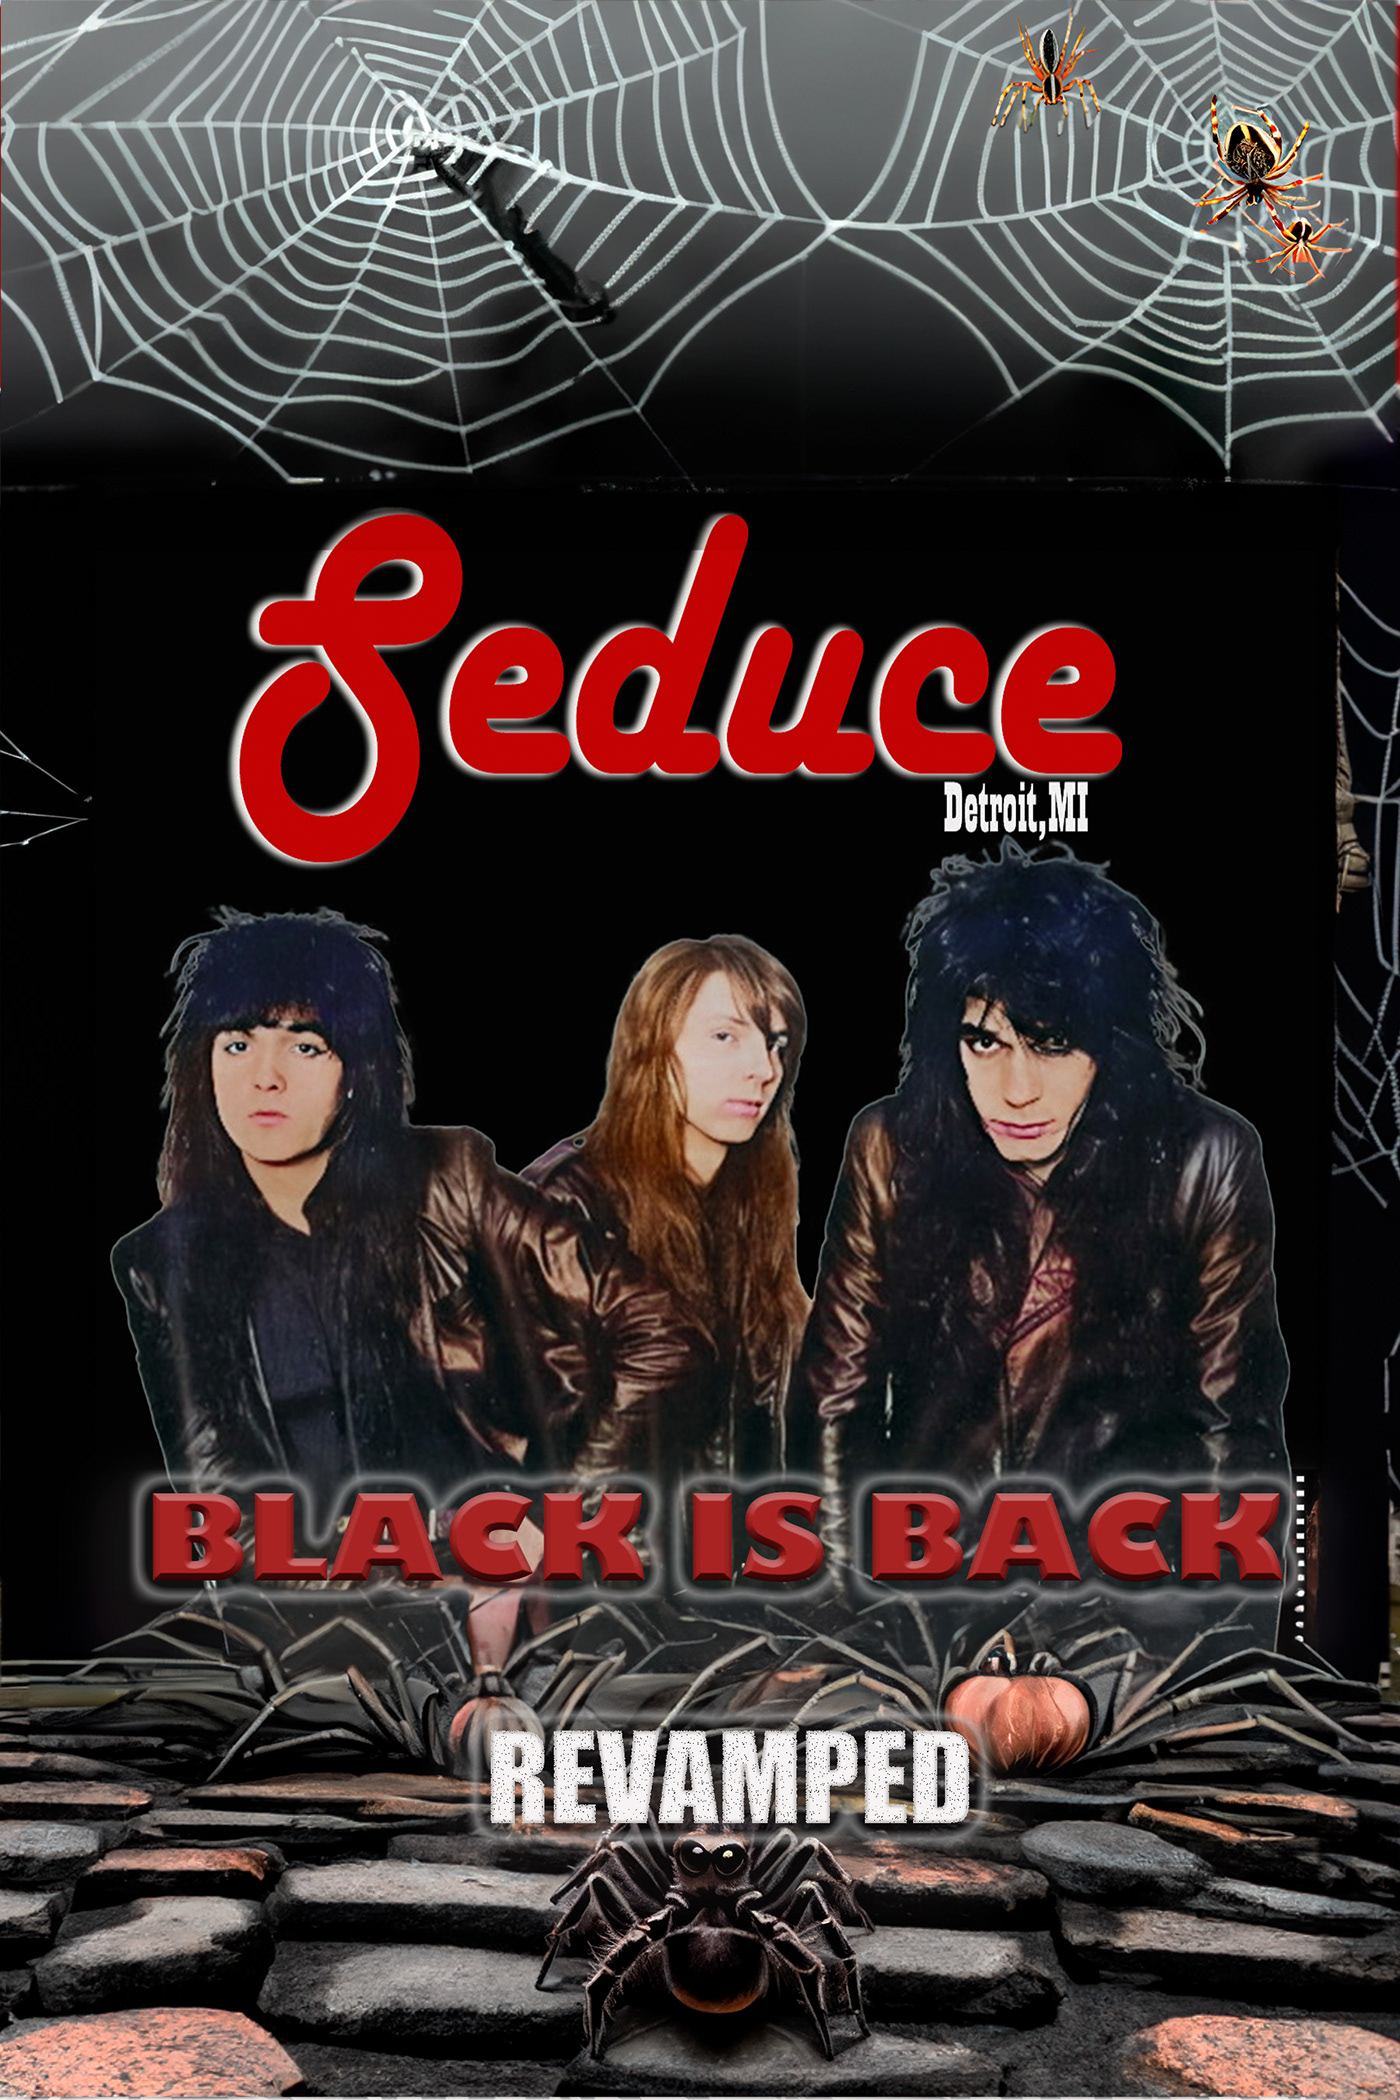 seduce Poster Design posters band posters